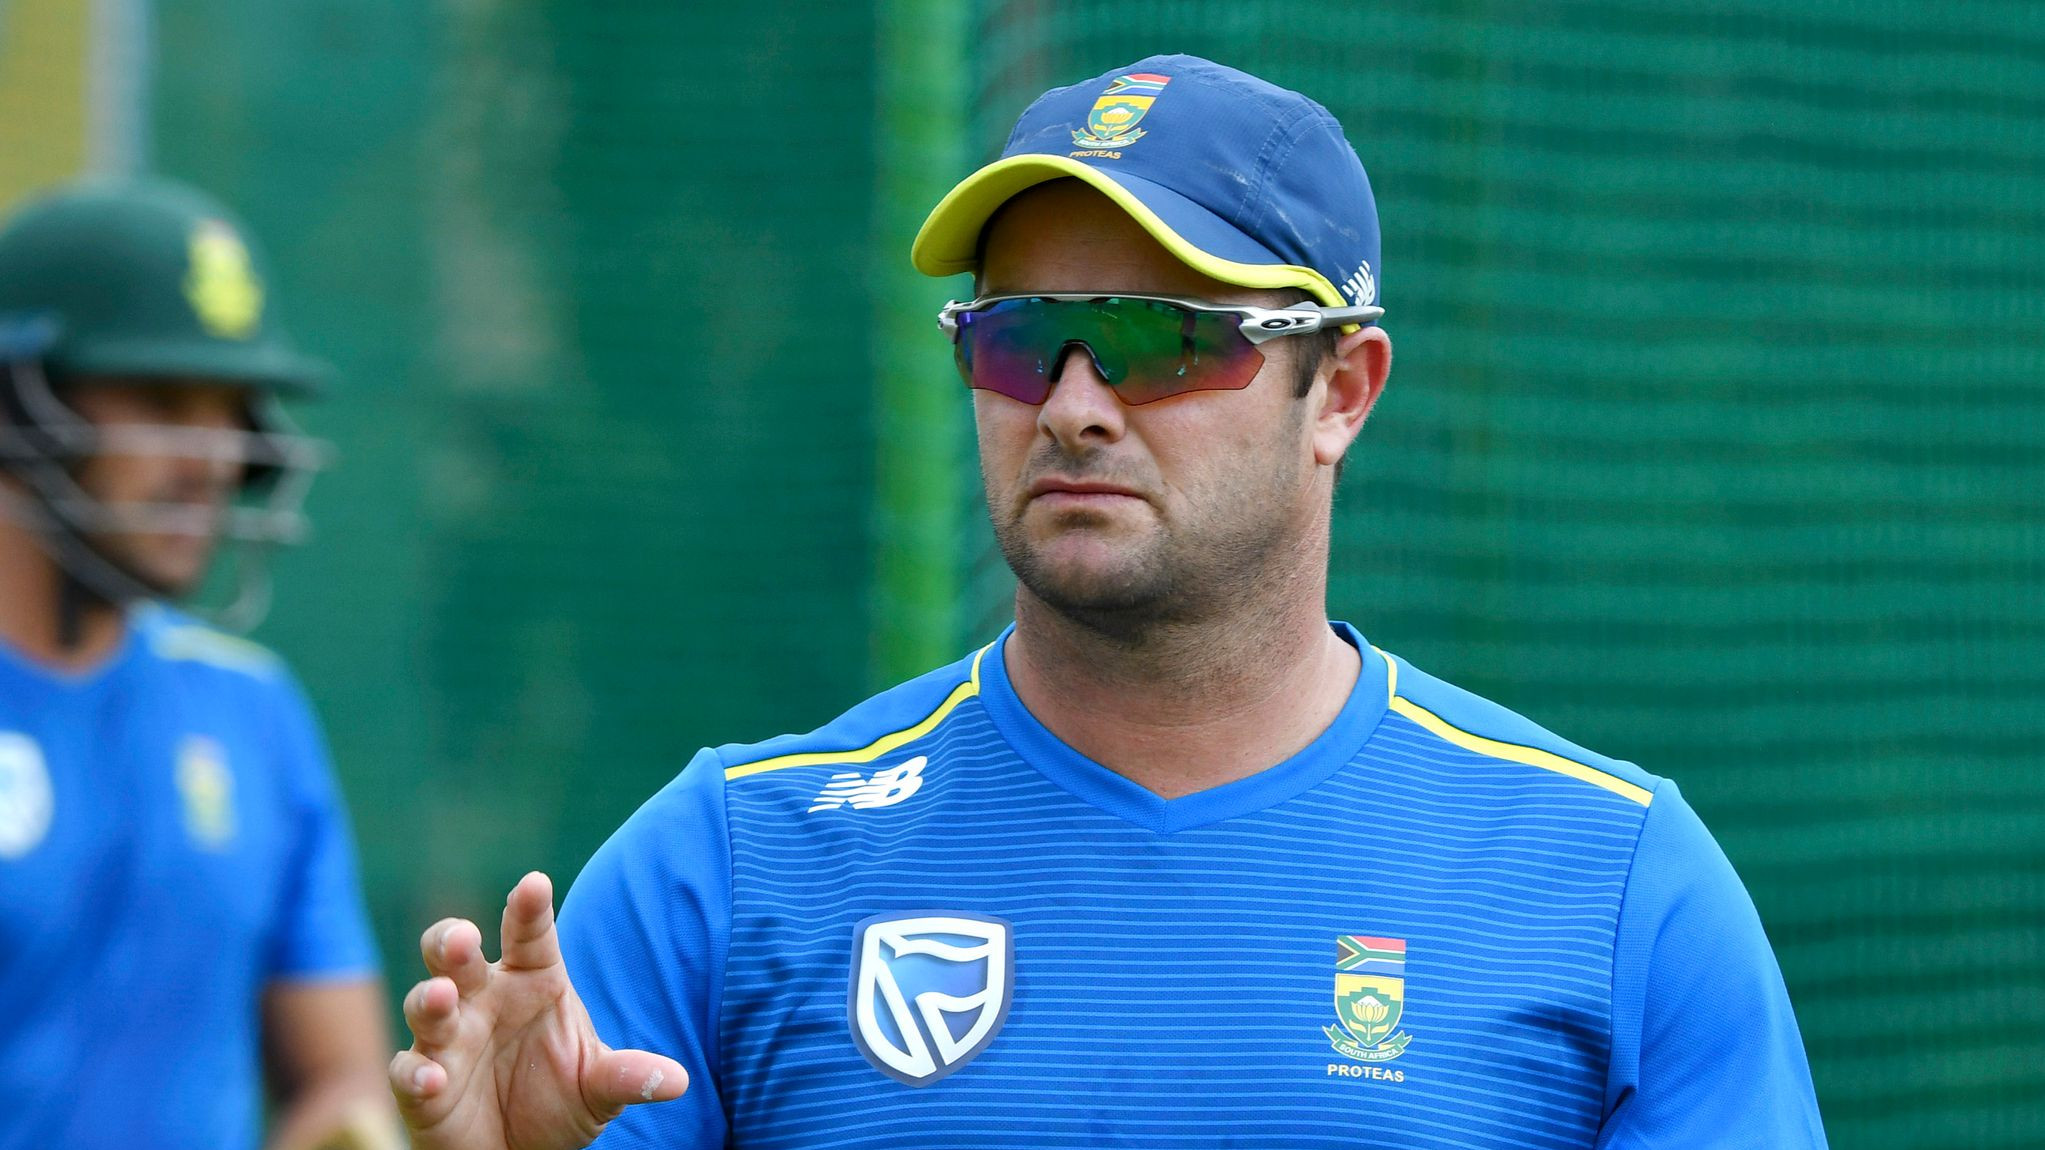 Mark Boucher apologizes for offensive songs, nicknames for colored teammates during playing days